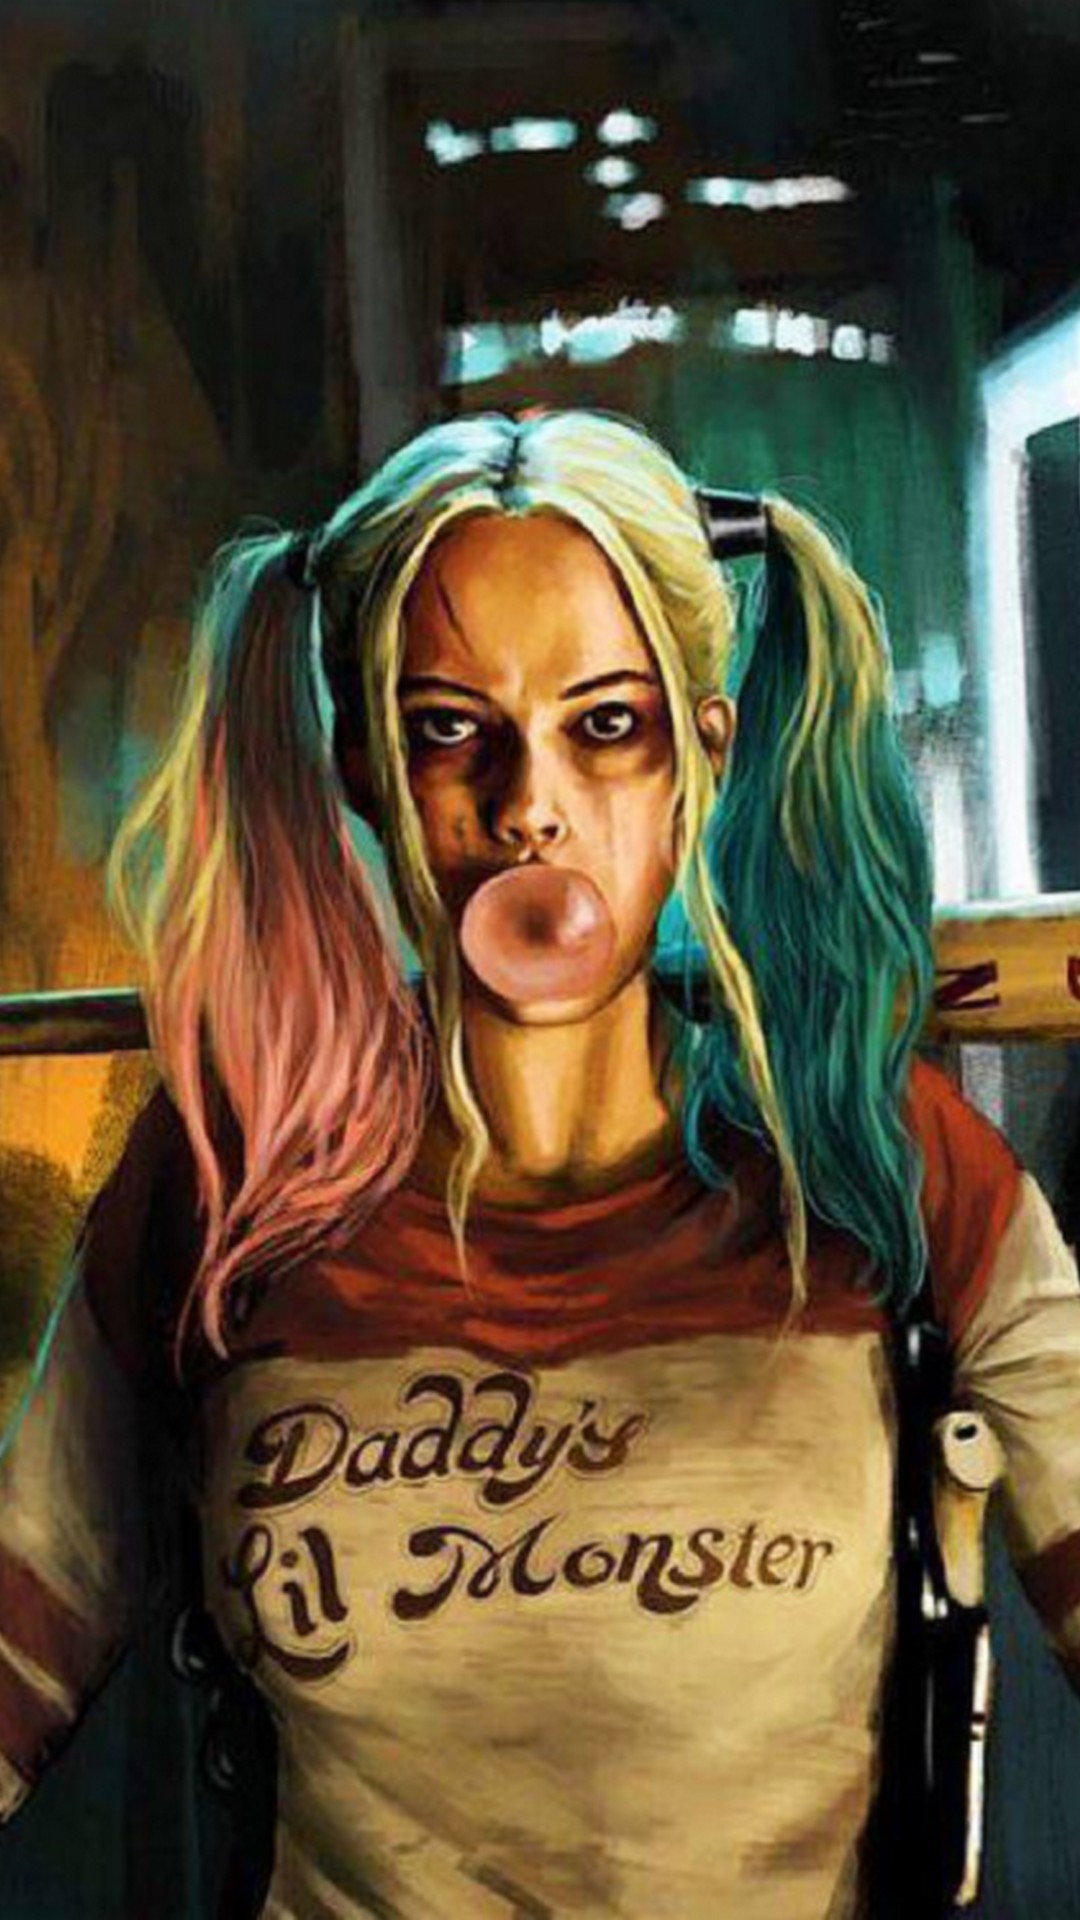 Harley Quinn iPhone Wallpaper with resolution 1080X1920 pixel. You can make this wallpaper for your iPhone 5, 6, 7, 8, X backgrounds, Mobile Screensaver, or iPad Lock Screen